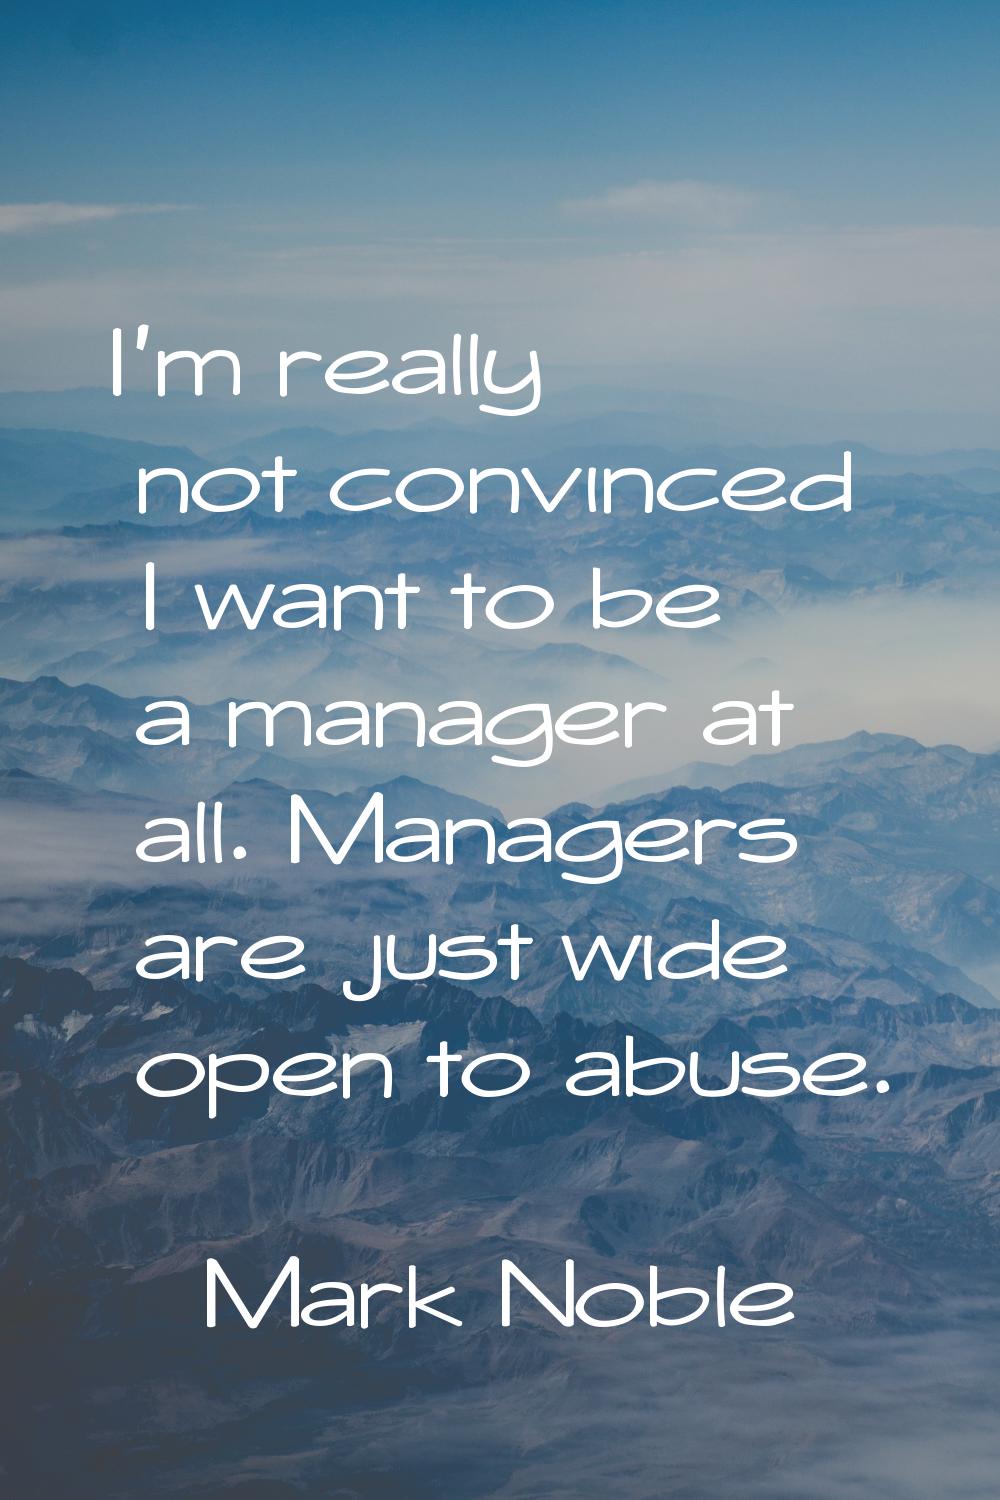 I'm really not convinced I want to be a manager at all. Managers are just wide open to abuse.